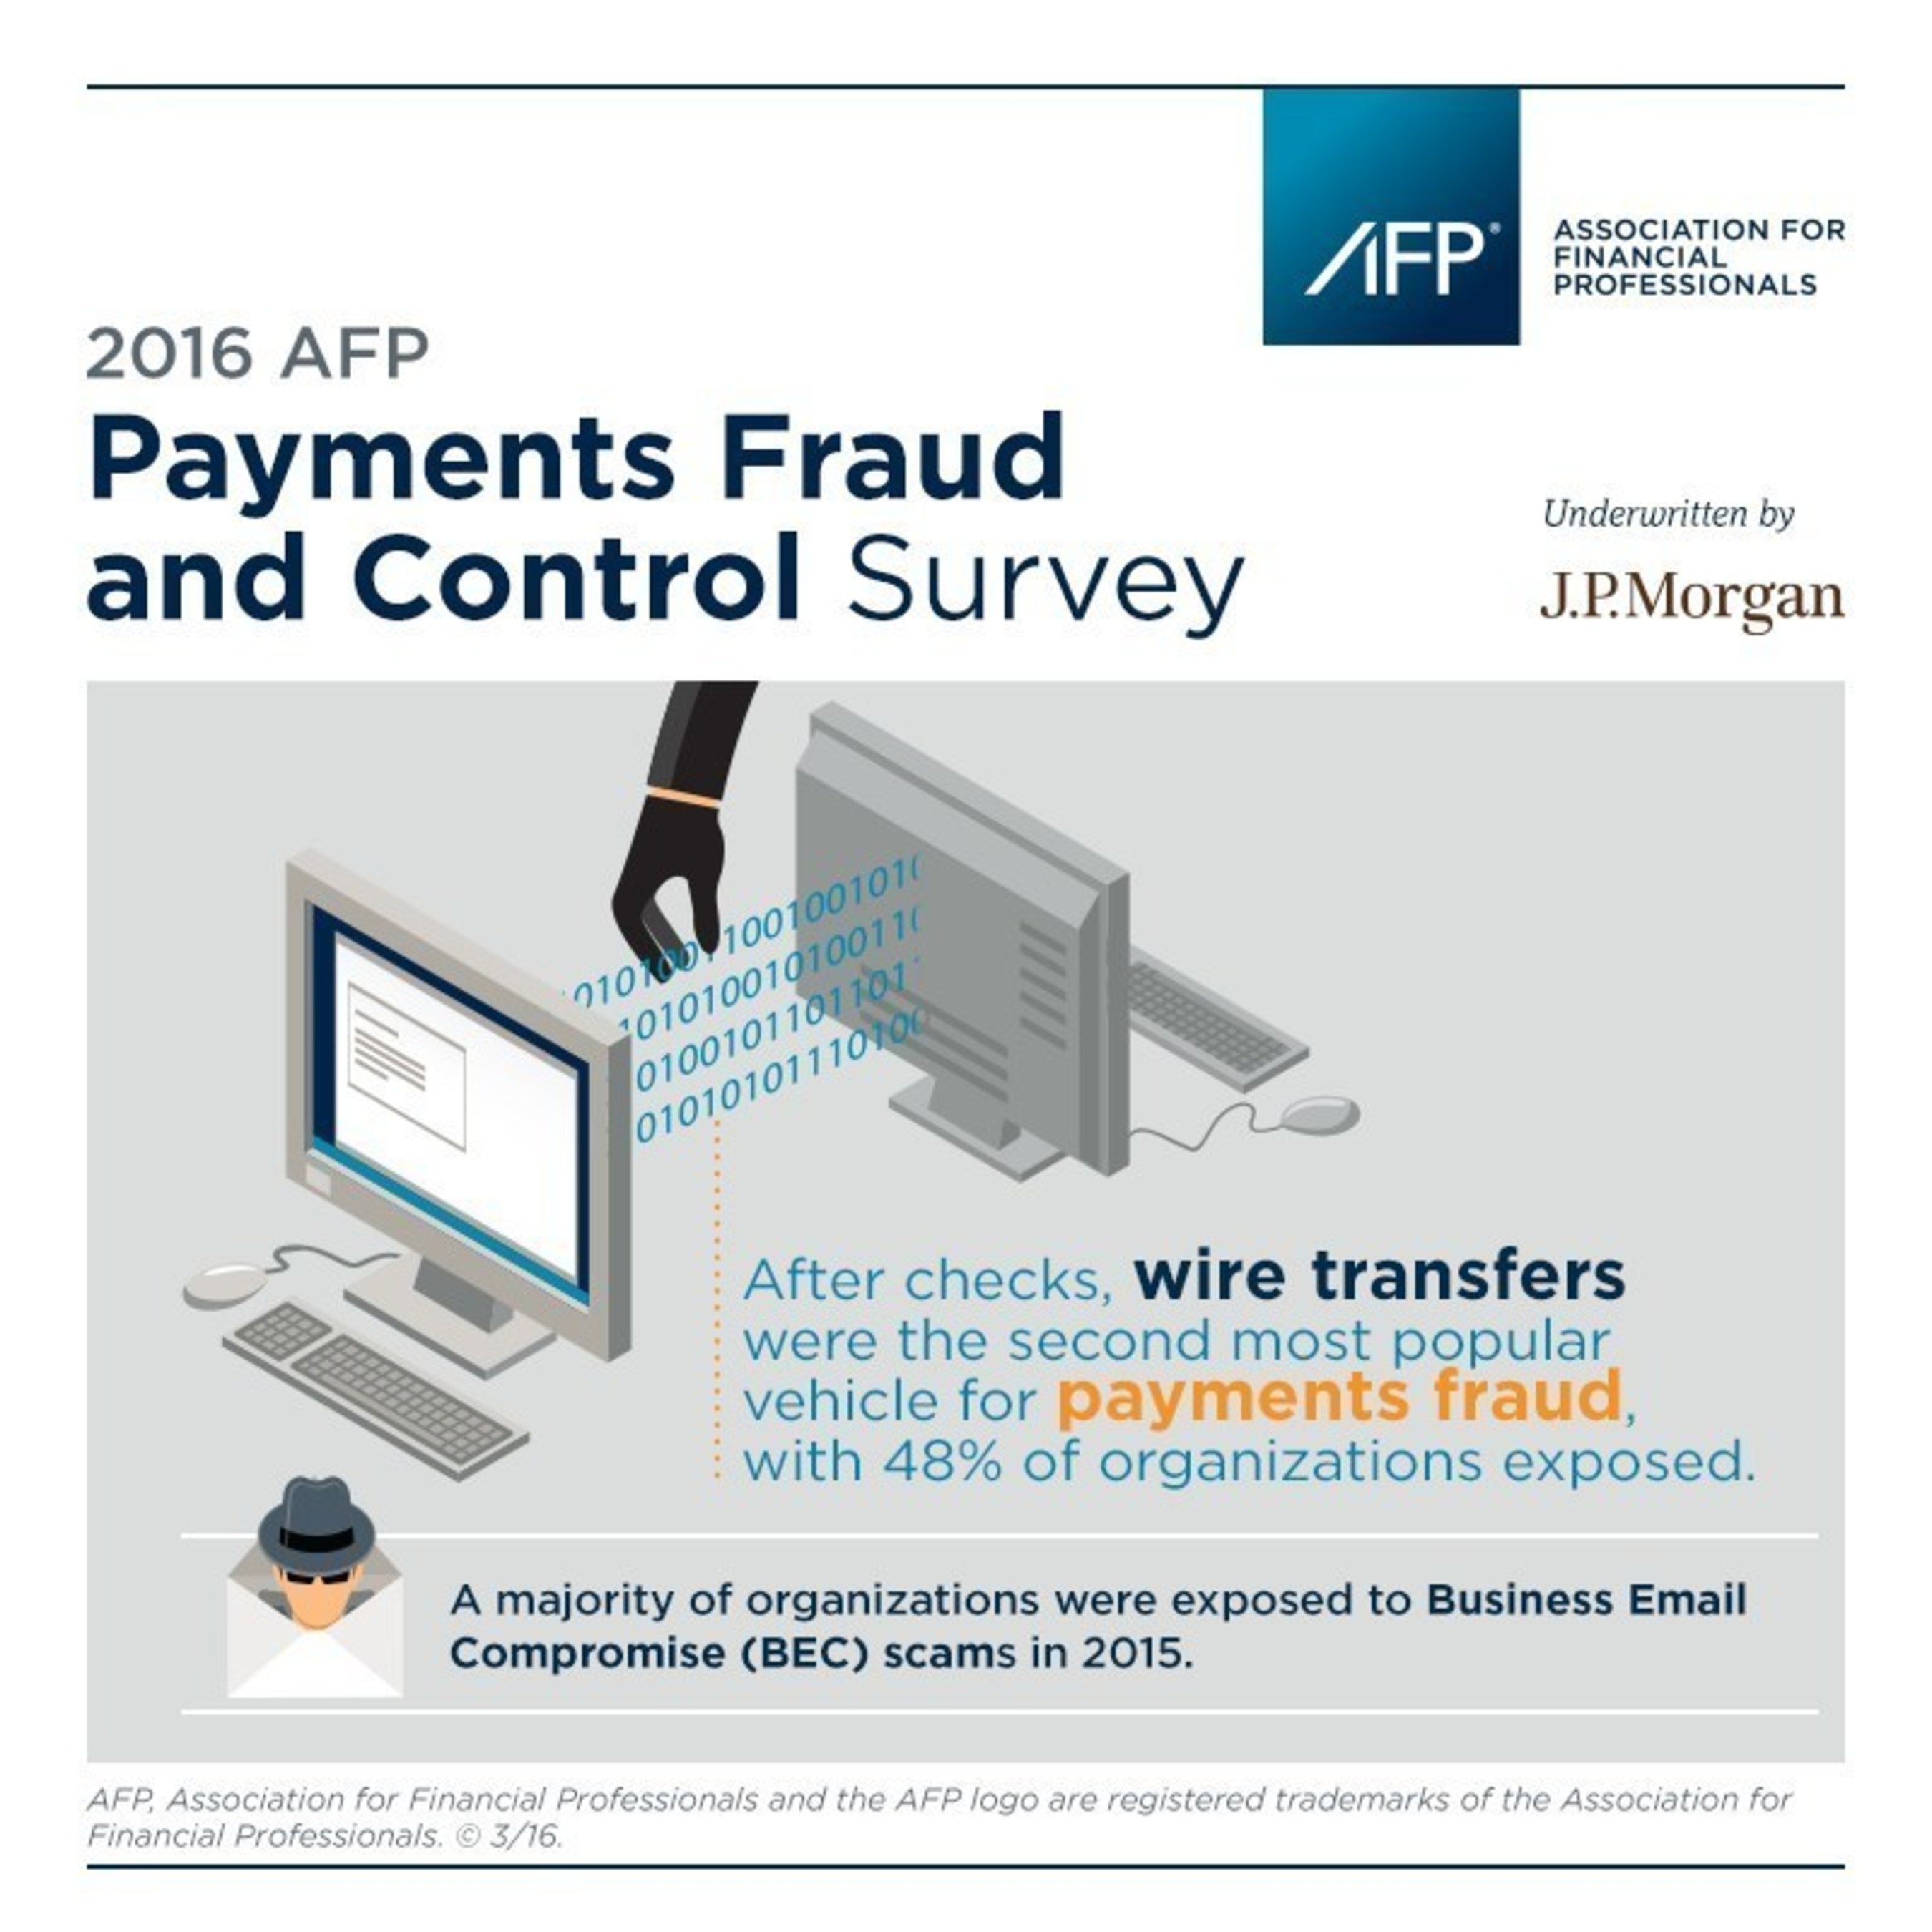 Association for Financial Professionals' Annual Payments Fraud and Control Survey finds wire fraud to be skyrocketing possibly due to increasingly popular business email compromise scams. Read the full results at www.AFPonline.org/Fraud.